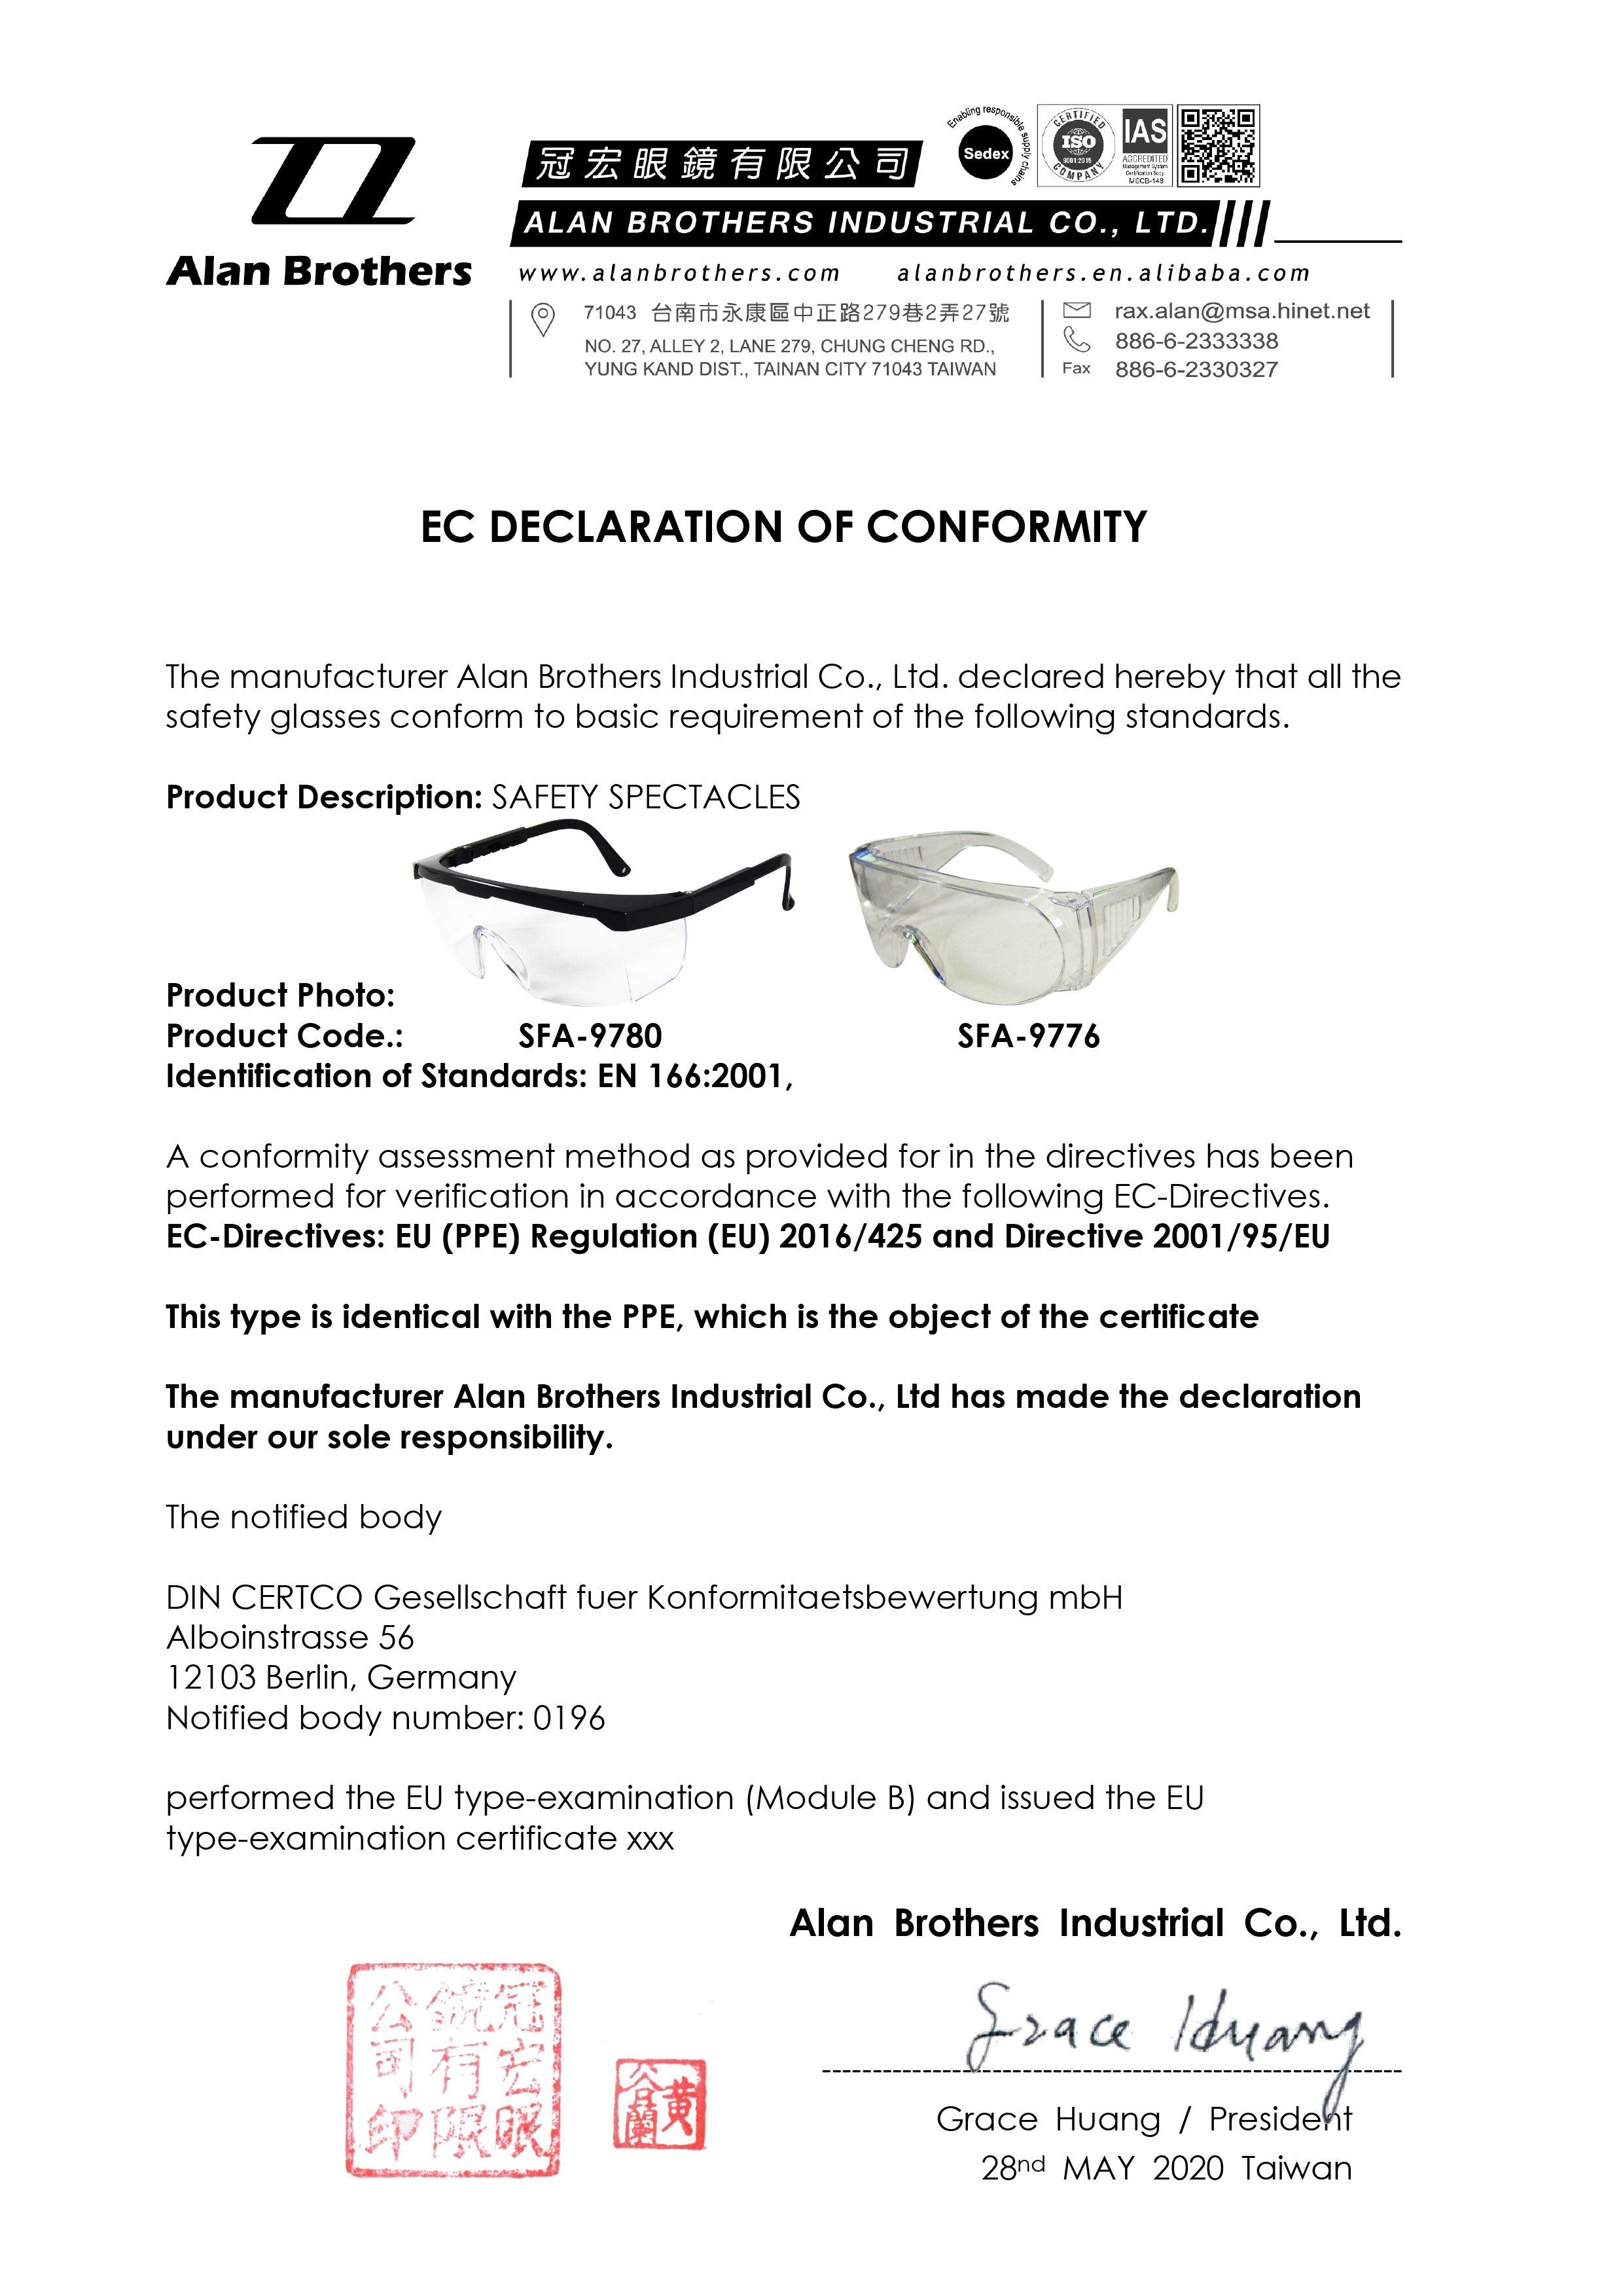 CERTIFICATE OF COMFORMITY-SAFETY SPECTACLES-alan brothers.jpg